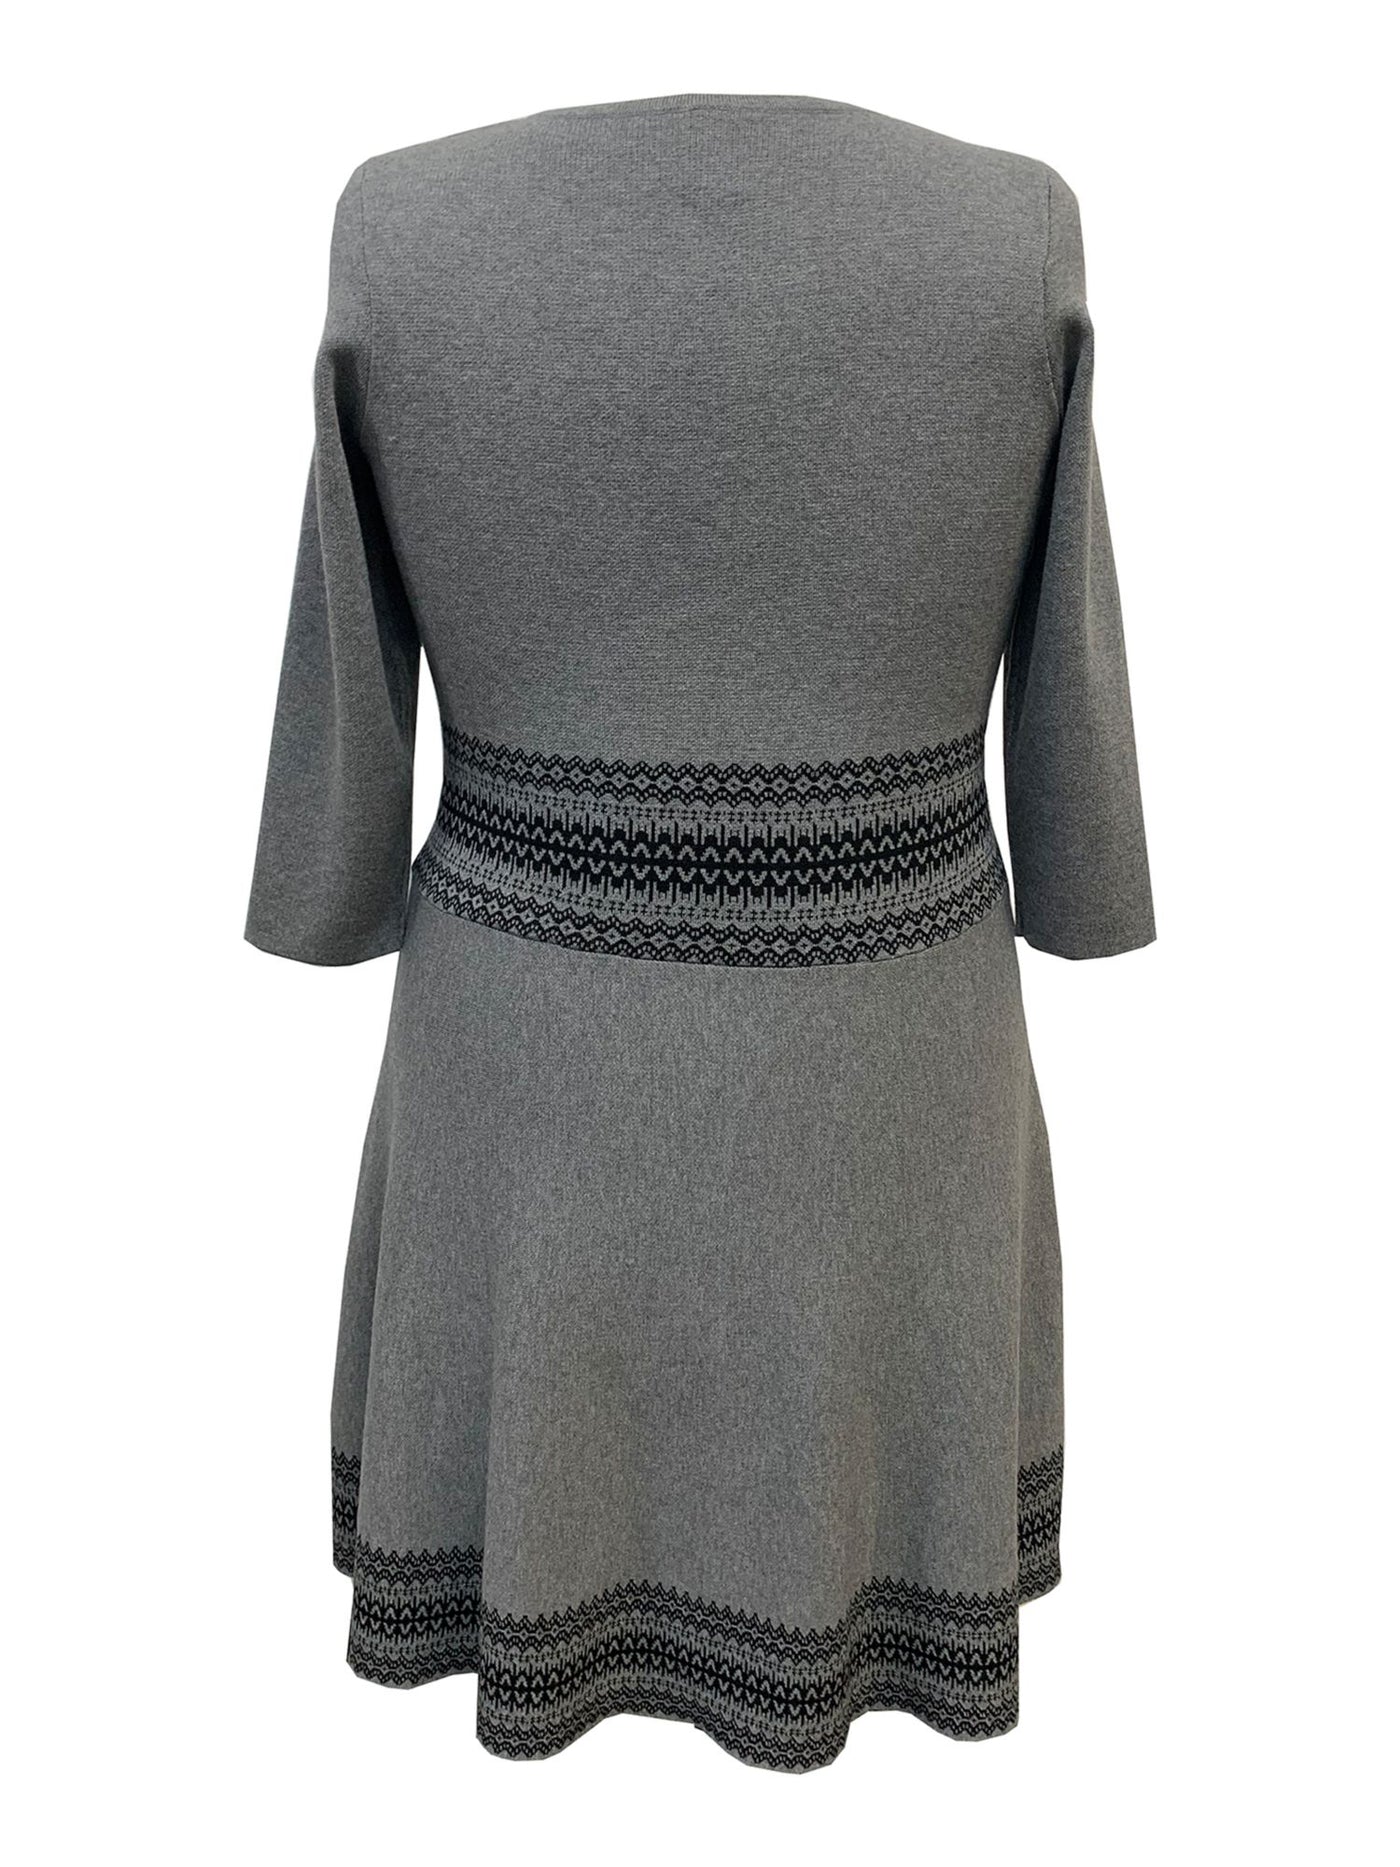 TAYLOR Womens Gray Knit Heather 3/4 Sleeve Jewel Neck Knee Length Wear To Work Fit + Flare Dress Plus 1X